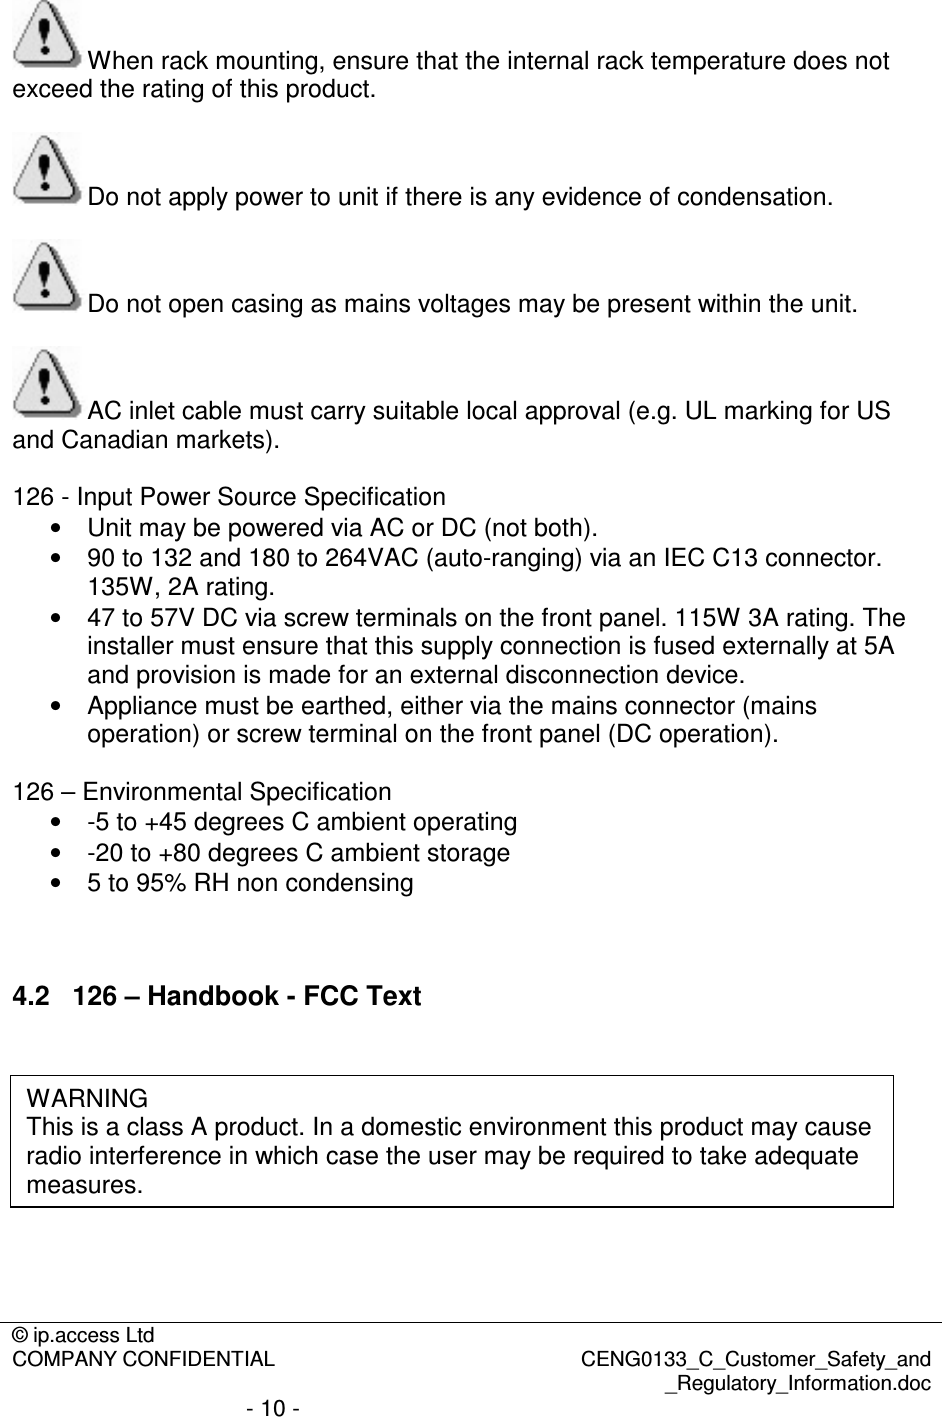 © ip.access Ltd  COMPANY CONFIDENTIAL  CENG0133_C_Customer_Safety_and _Regulatory_Information.doc - 10 -  When rack mounting, ensure that the internal rack temperature does not exceed the rating of this product.  Do not apply power to unit if there is any evidence of condensation.  Do not open casing as mains voltages may be present within the unit.  AC inlet cable must carry suitable local approval (e.g. UL marking for US and Canadian markets).  126 - Input Power Source Specification •  Unit may be powered via AC or DC (not both). •  90 to 132 and 180 to 264VAC (auto-ranging) via an IEC C13 connector. 135W, 2A rating. •  47 to 57V DC via screw terminals on the front panel. 115W 3A rating. The installer must ensure that this supply connection is fused externally at 5A and provision is made for an external disconnection device. •  Appliance must be earthed, either via the mains connector (mains operation) or screw terminal on the front panel (DC operation).  126 – Environmental Specification •  -5 to +45 degrees C ambient operating •  -20 to +80 degrees C ambient storage •  5 to 95% RH non condensing   4.2  126 – Handbook - FCC Text         WARNING This is a class A product. In a domestic environment this product may cause radio interference in which case the user may be required to take adequate measures. 